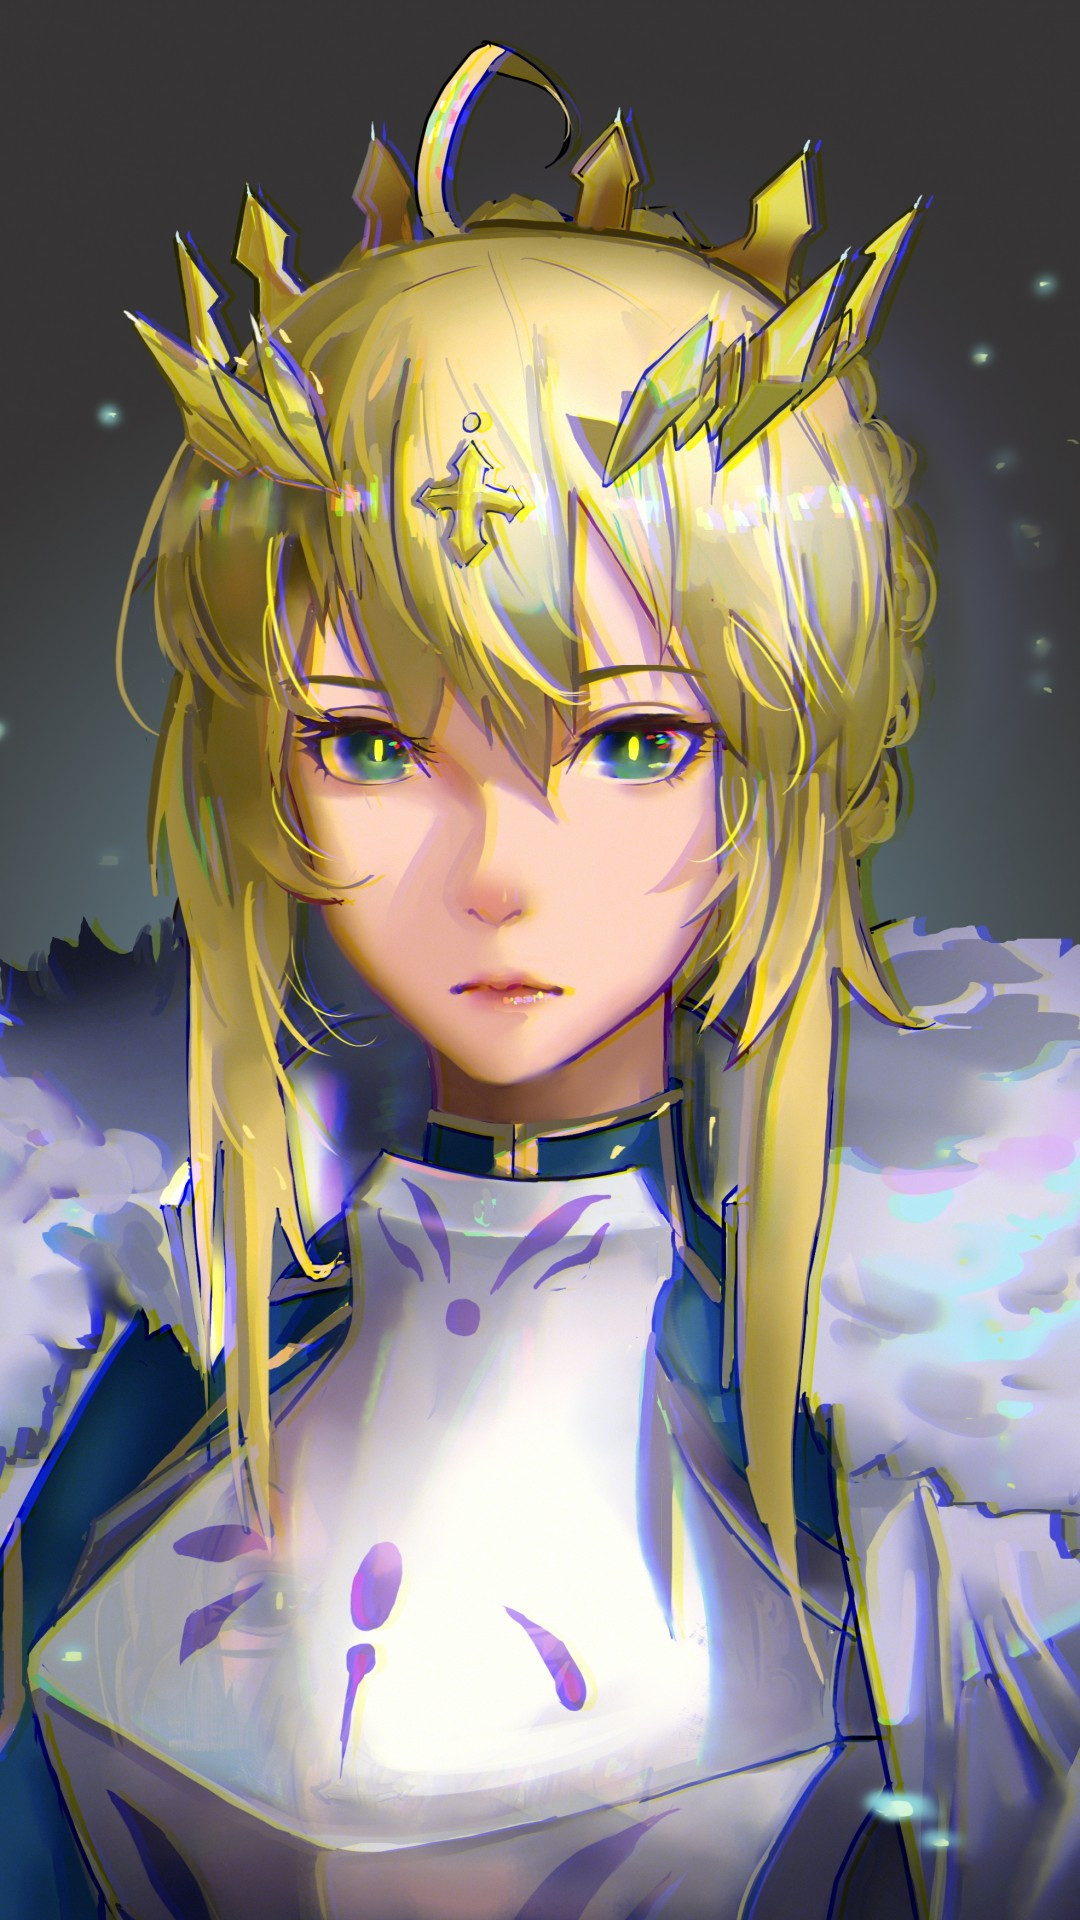 Download 1080x1920 Artoria Pendragon, Fate Grand Order, Blonde, Lancer, Tiara Wallpaper for iPhone iPhone 7 Plus, iPhone 6+, Sony Xperia Z, HTC One